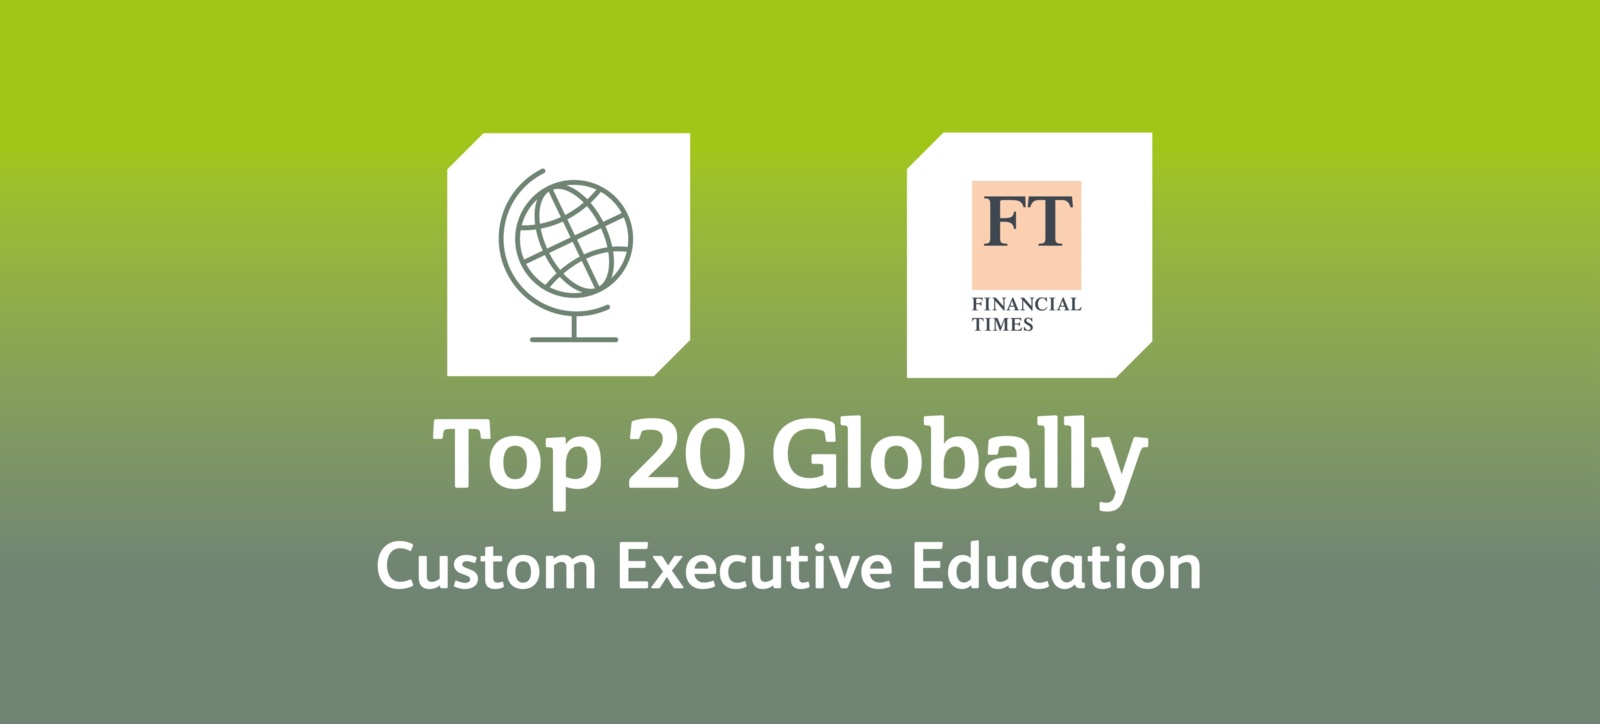 Warwick Business School 17th in the world in Financial Times Custom Executive Education